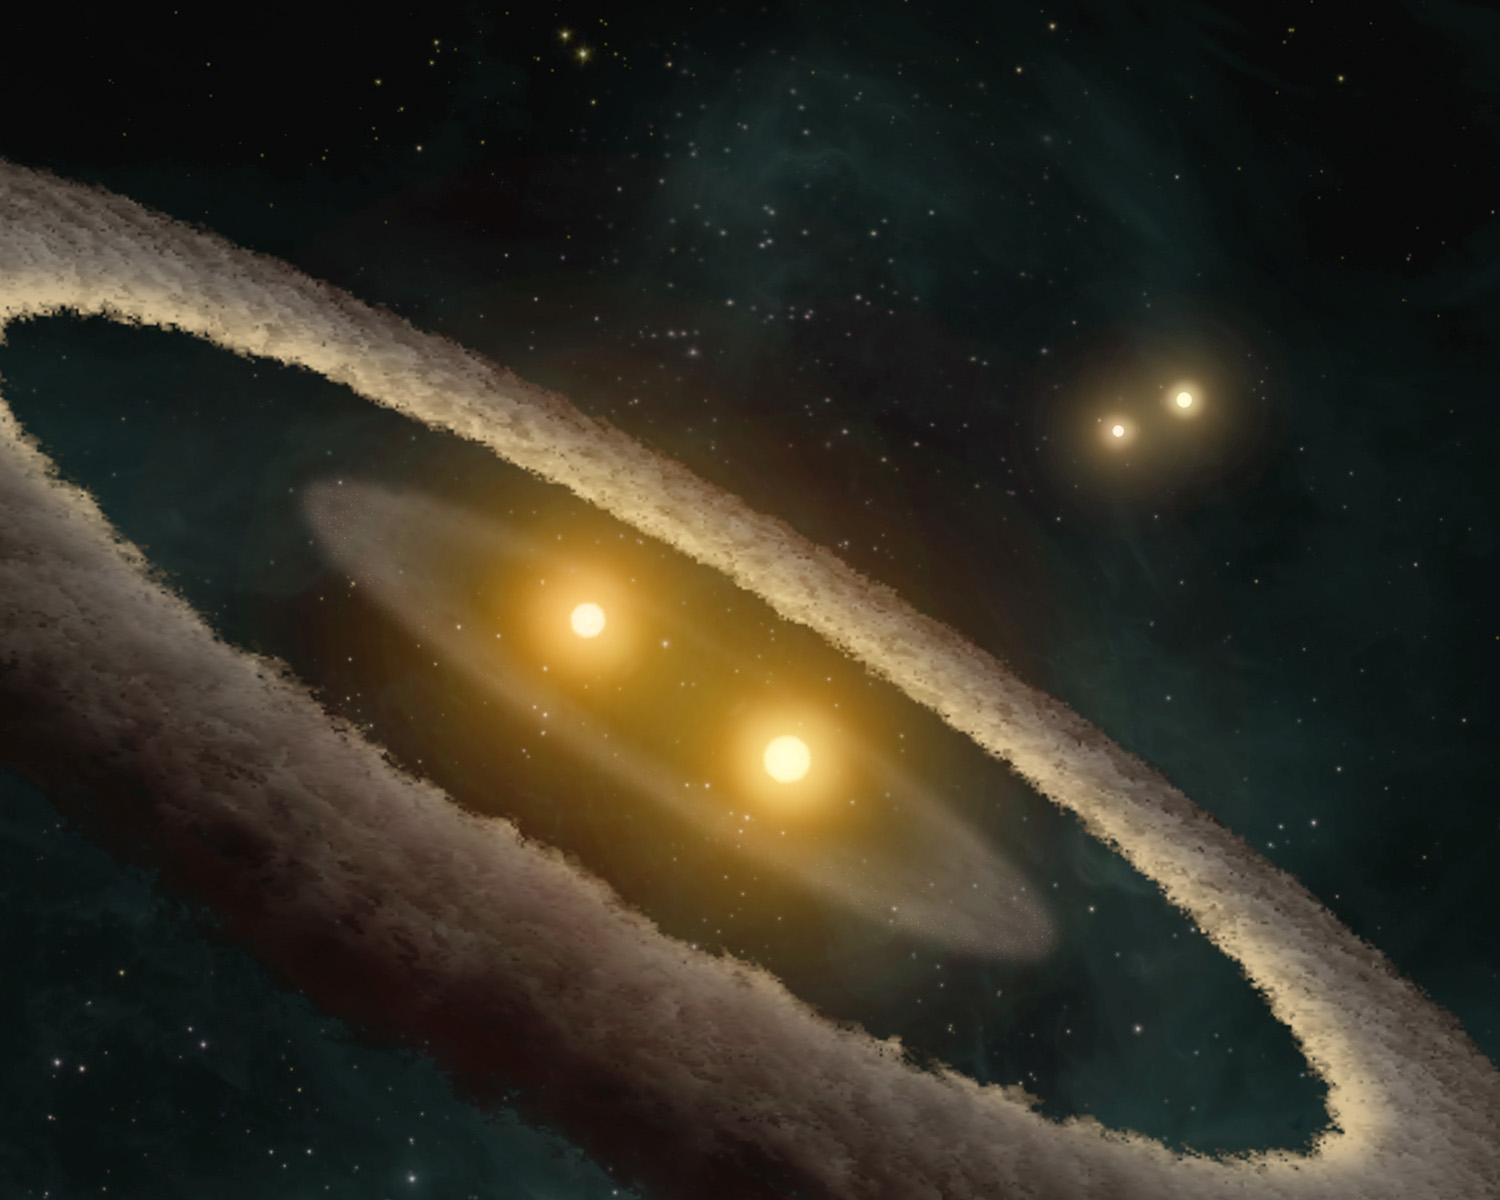 Artist's concept of a four-star system called HD 98800.